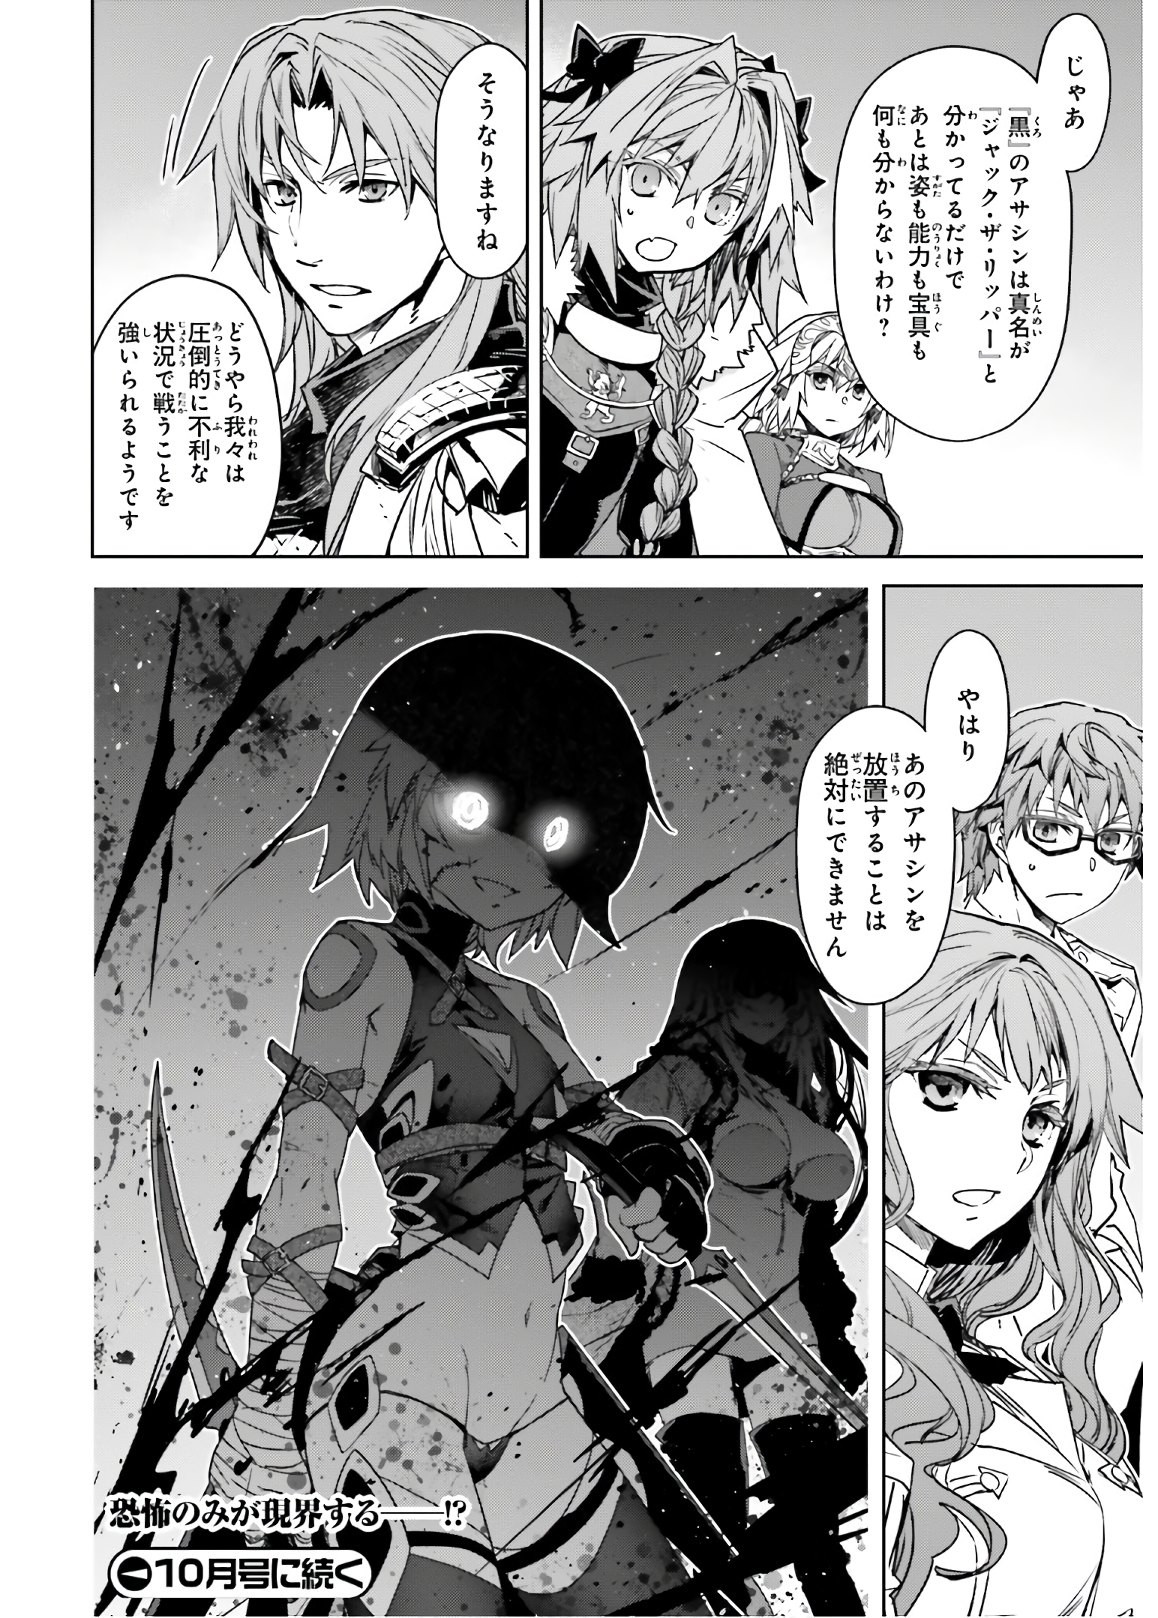 Fate-Apocrypha - Chapter 43 - Page 18